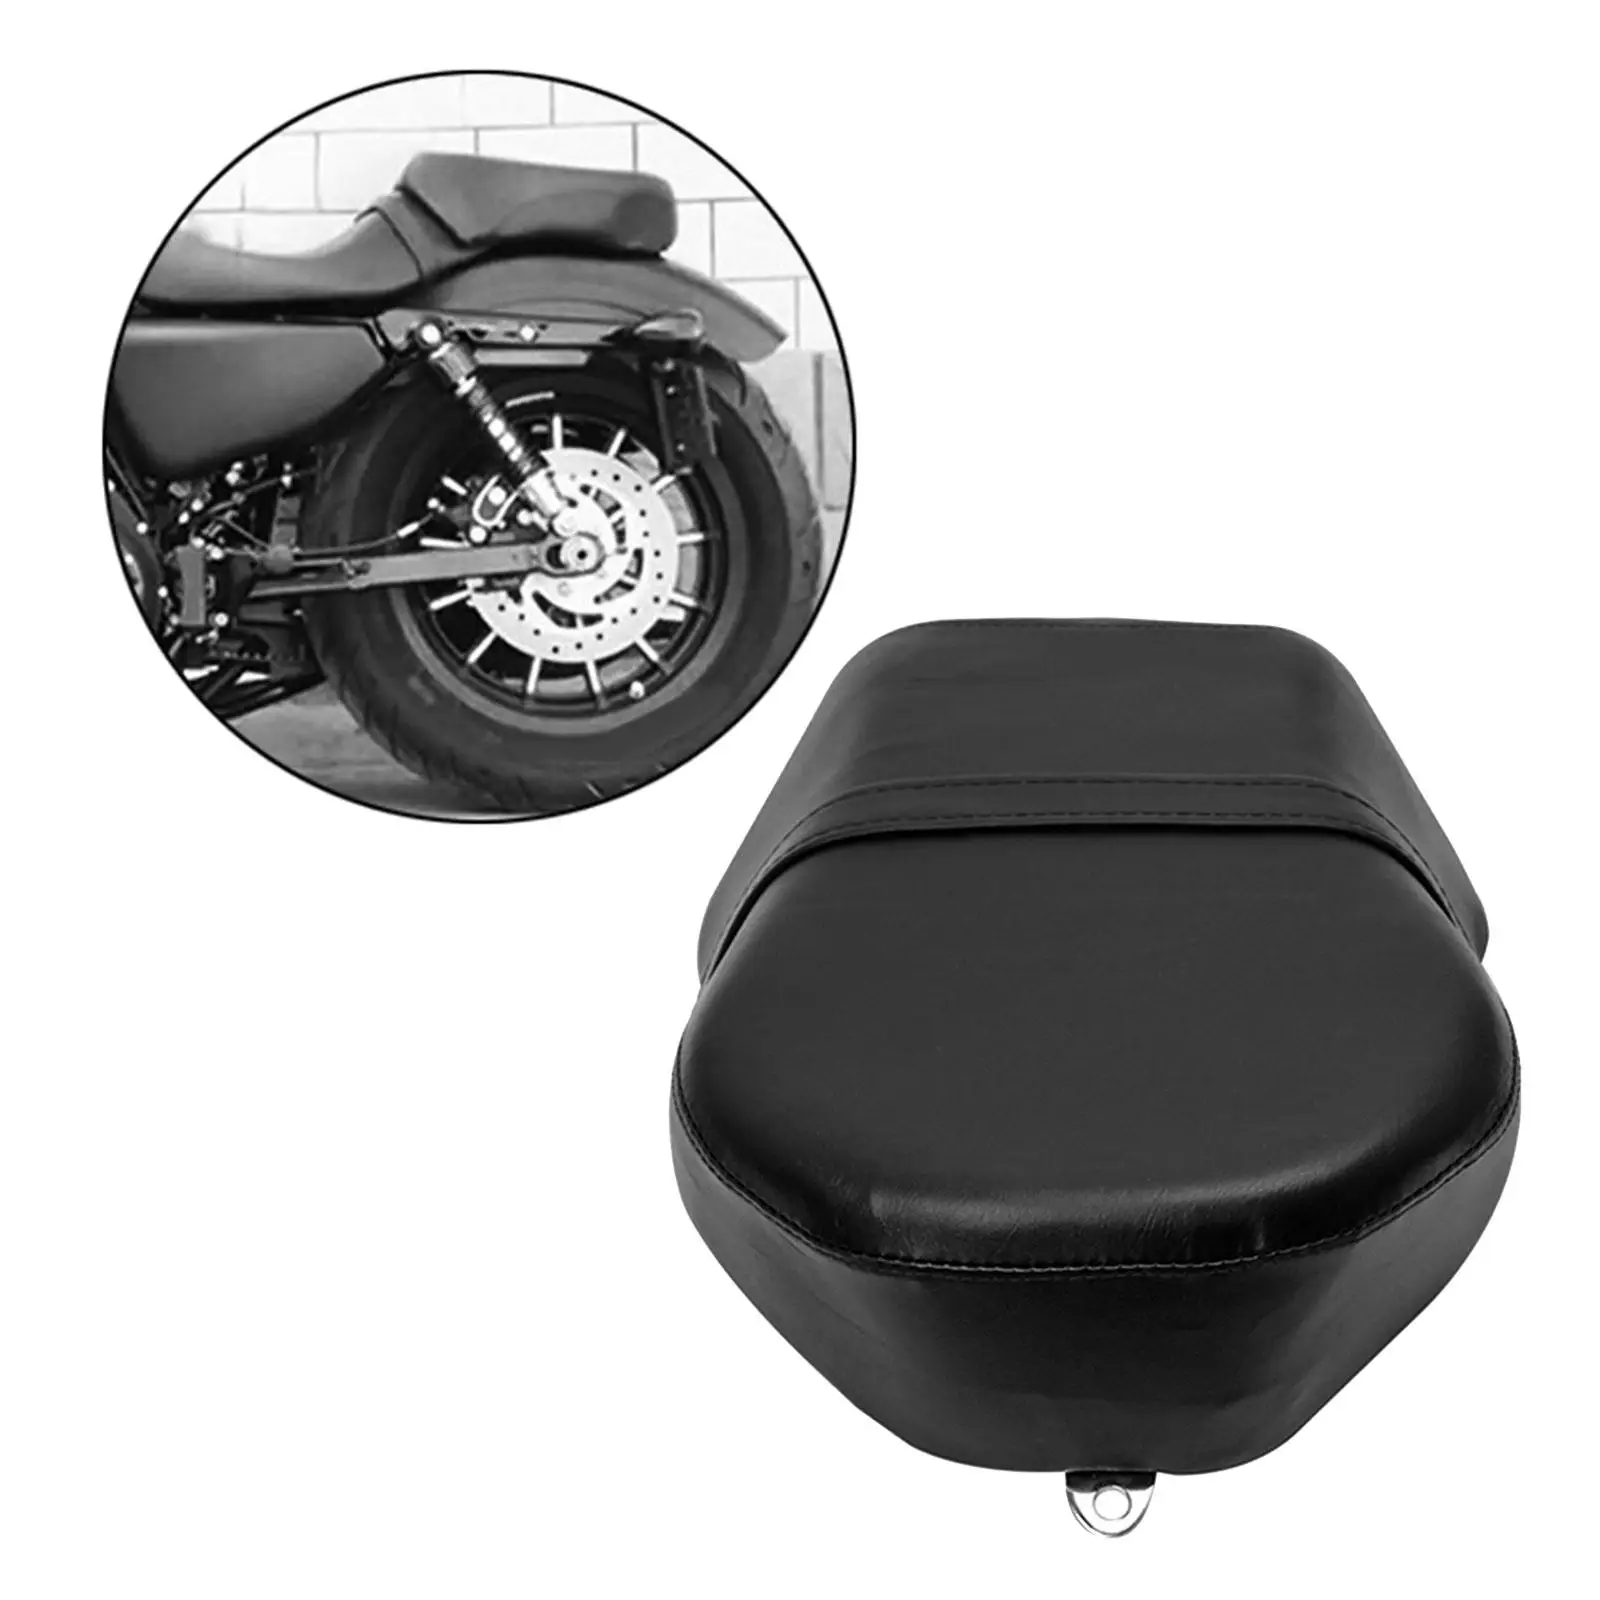 Motorcycle Rear Passenger Seat Cushion Motorcycle Pillion Passenger Pad for Harley Sportster 883 1200 Spare Parts Durable